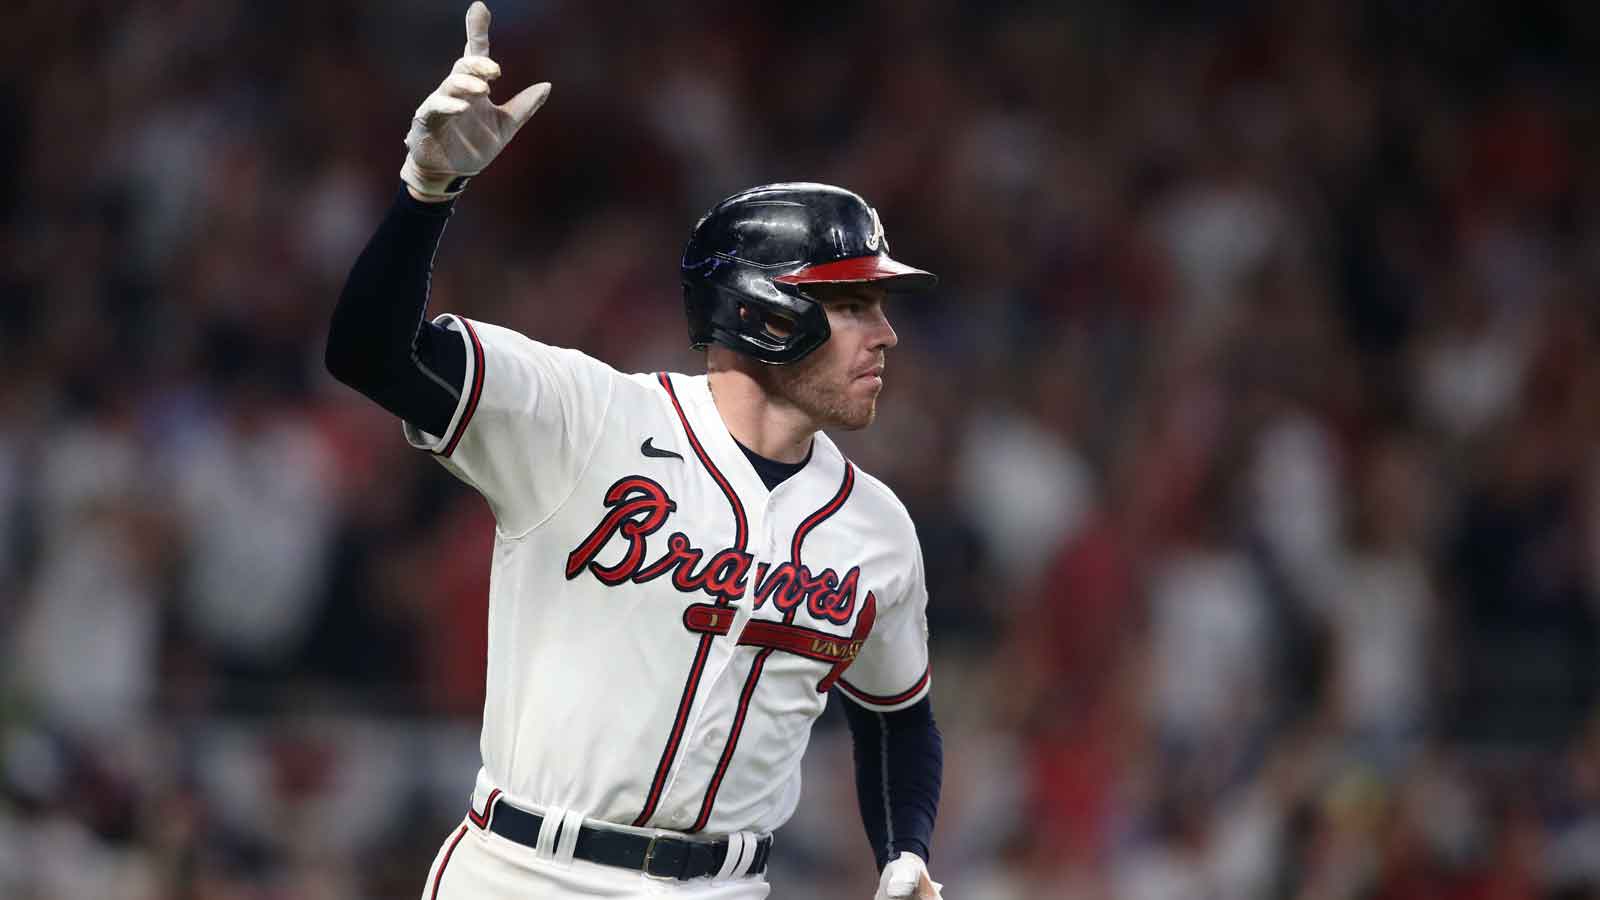 The Braves Are Going to Miss Freddie Freeman